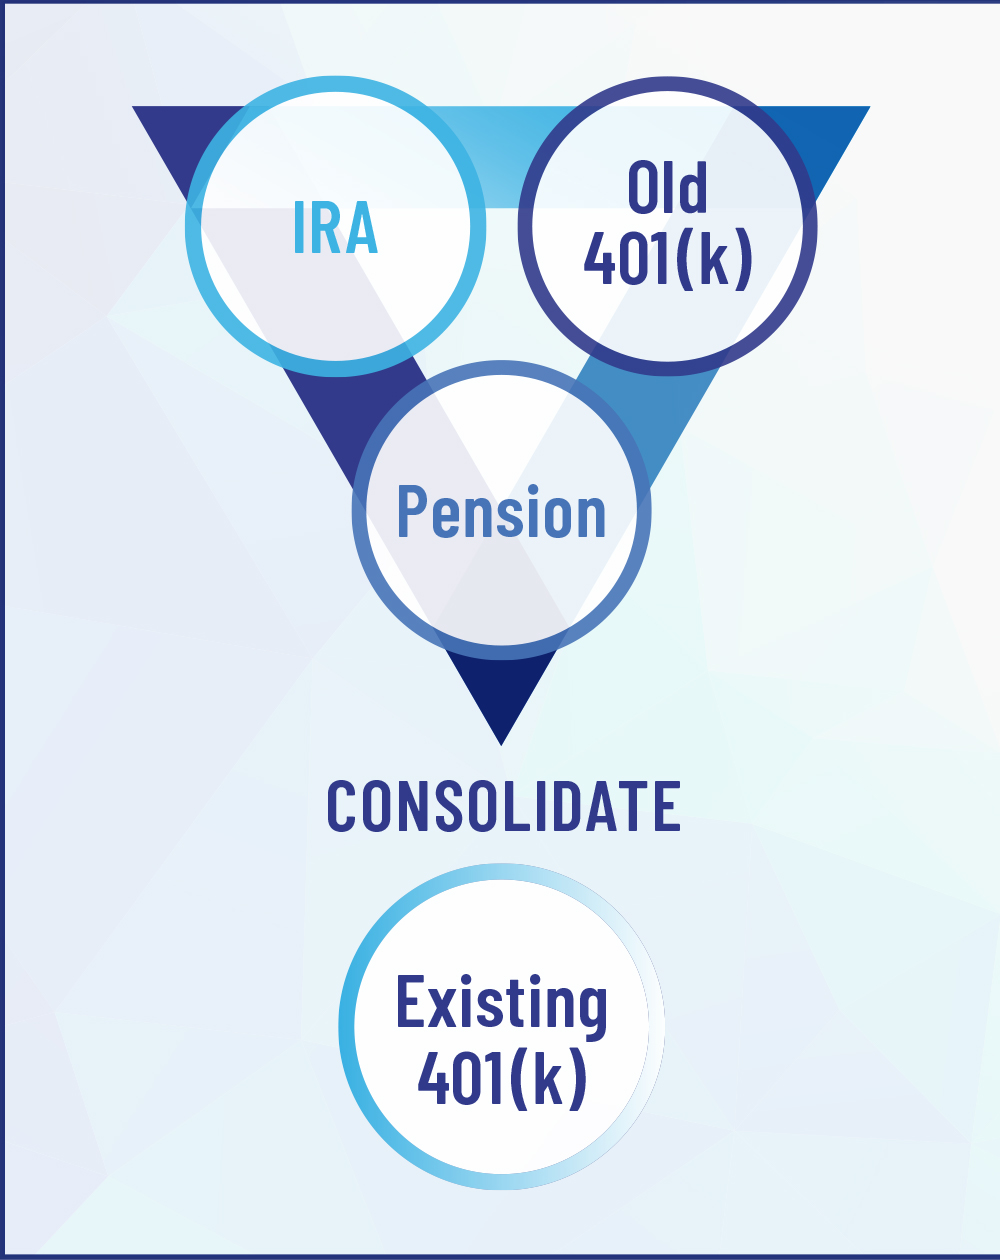 Chart: IRA, old 401k, and pension consolidate into an existing 401k